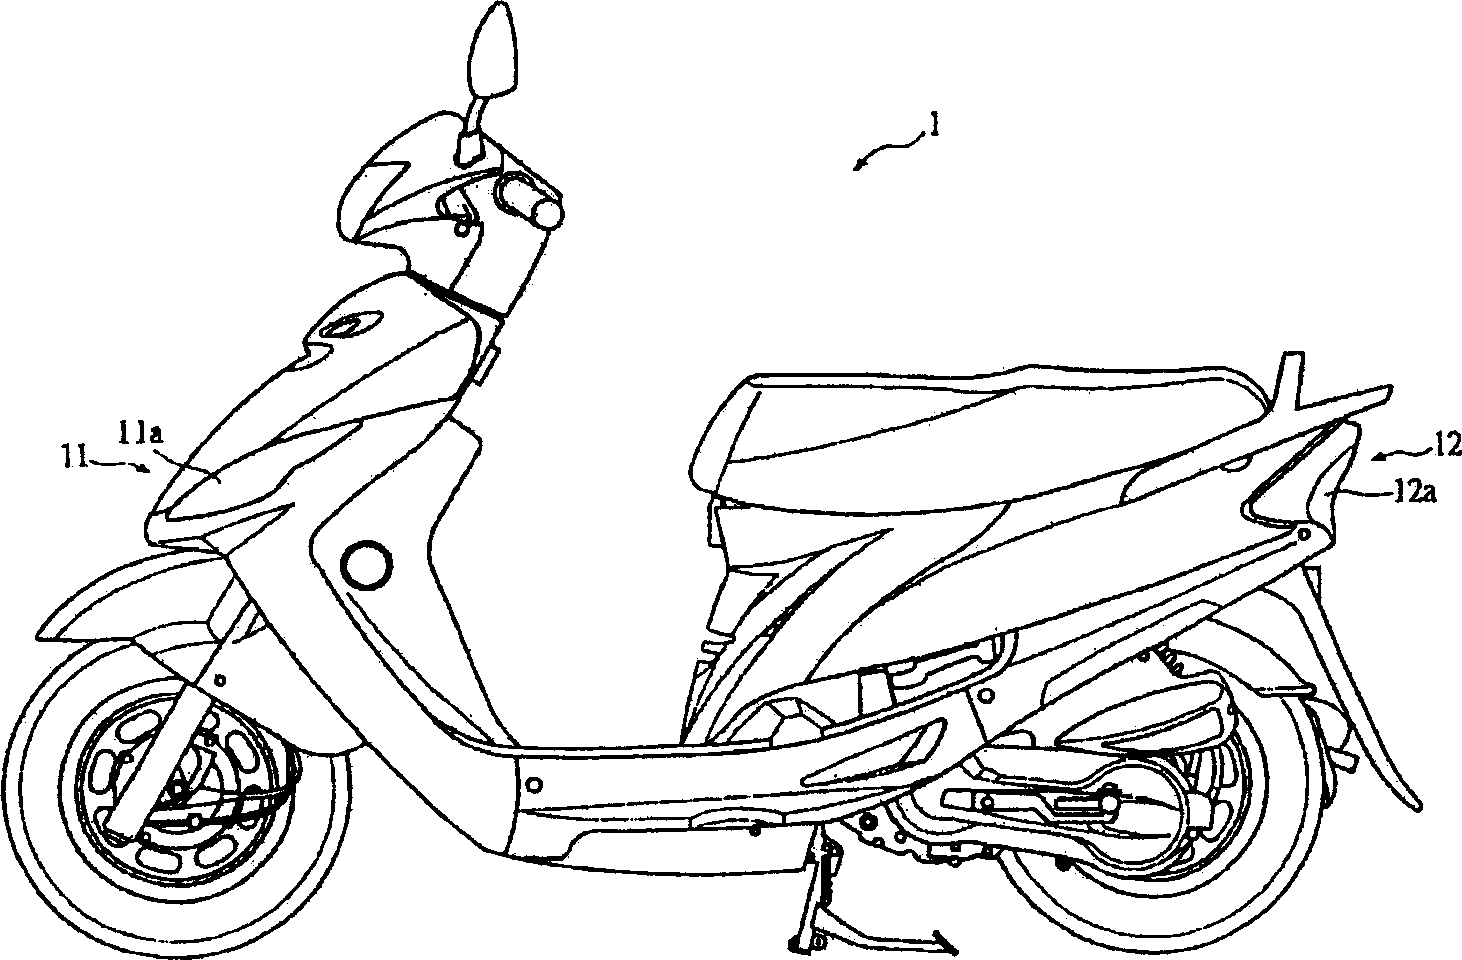 Detecting controller for motorcycle turning lamp